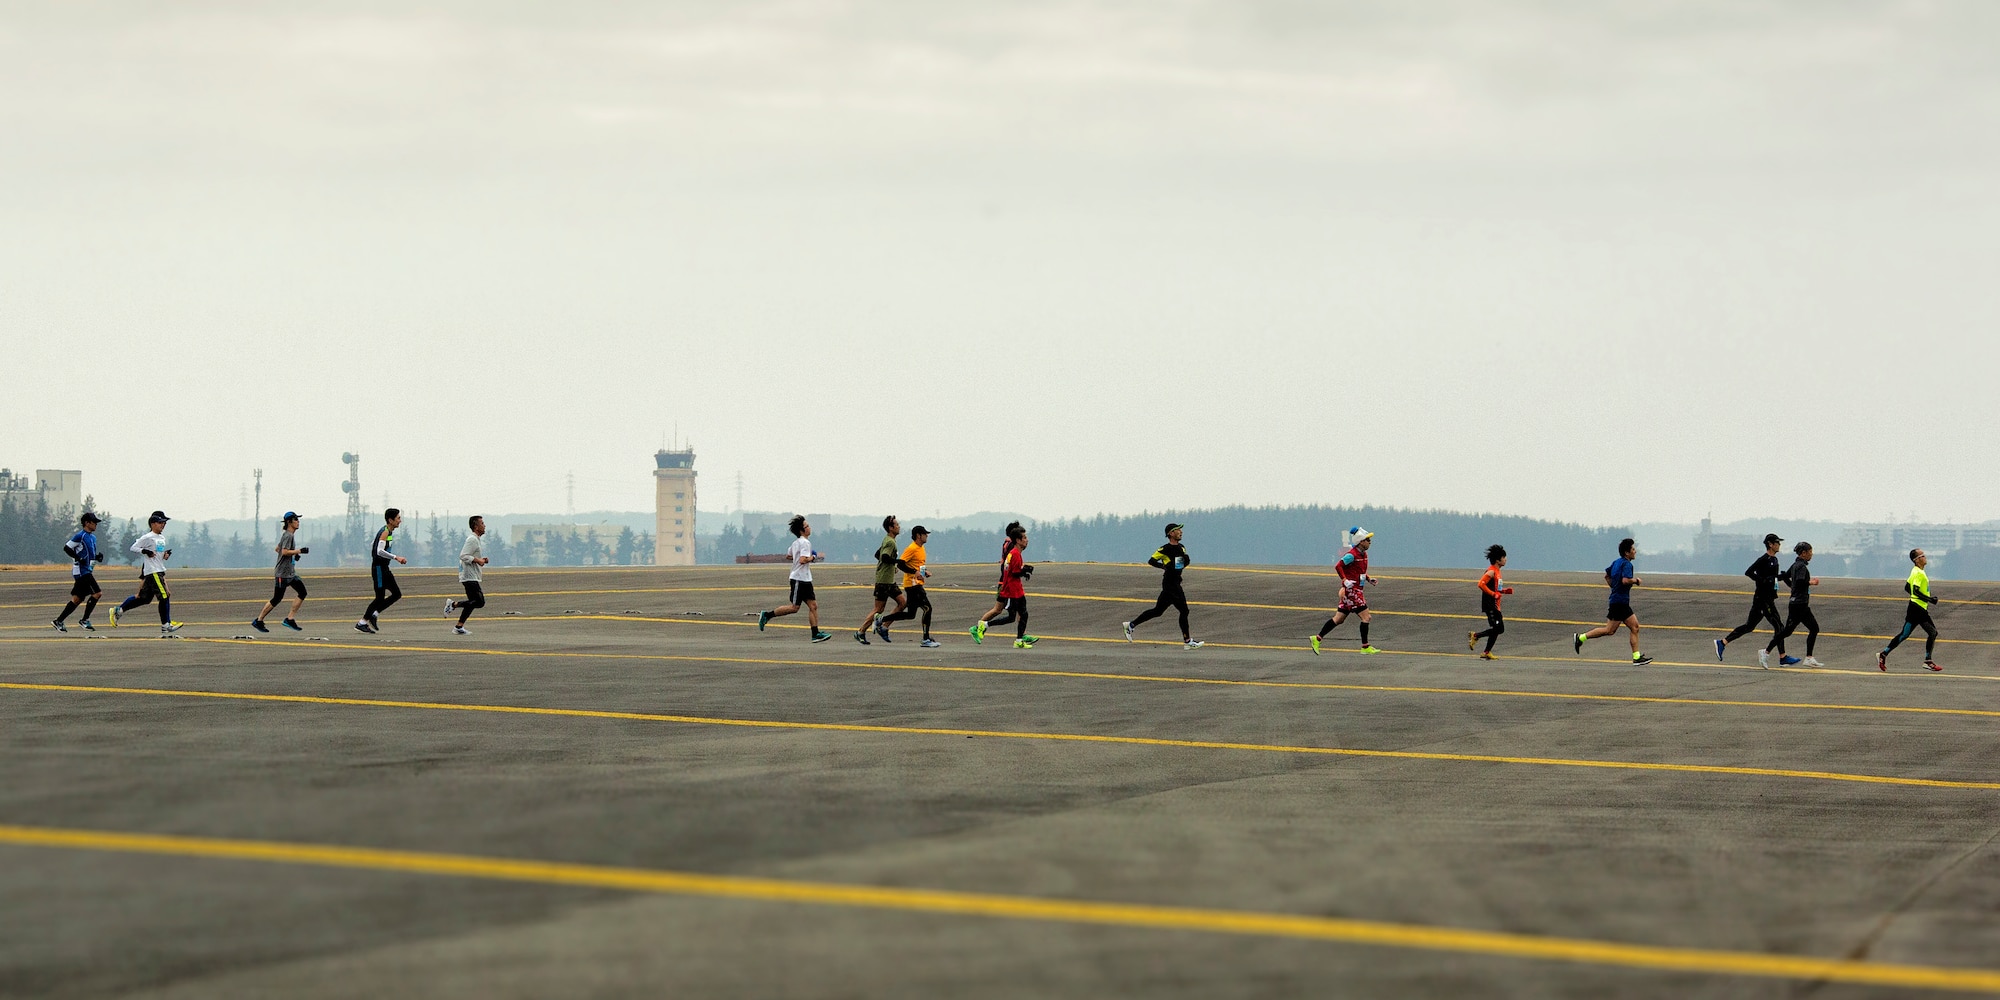 Yokota Striders Running Club sponsored the 35th Annual Frostbite Run at Yokota Air Base, Japan, Jan. 17, 2016. Team Yokota hosted over 9,000 participants for the event. (U.S. Air Force photo by Osakabe Yasuo/Released)